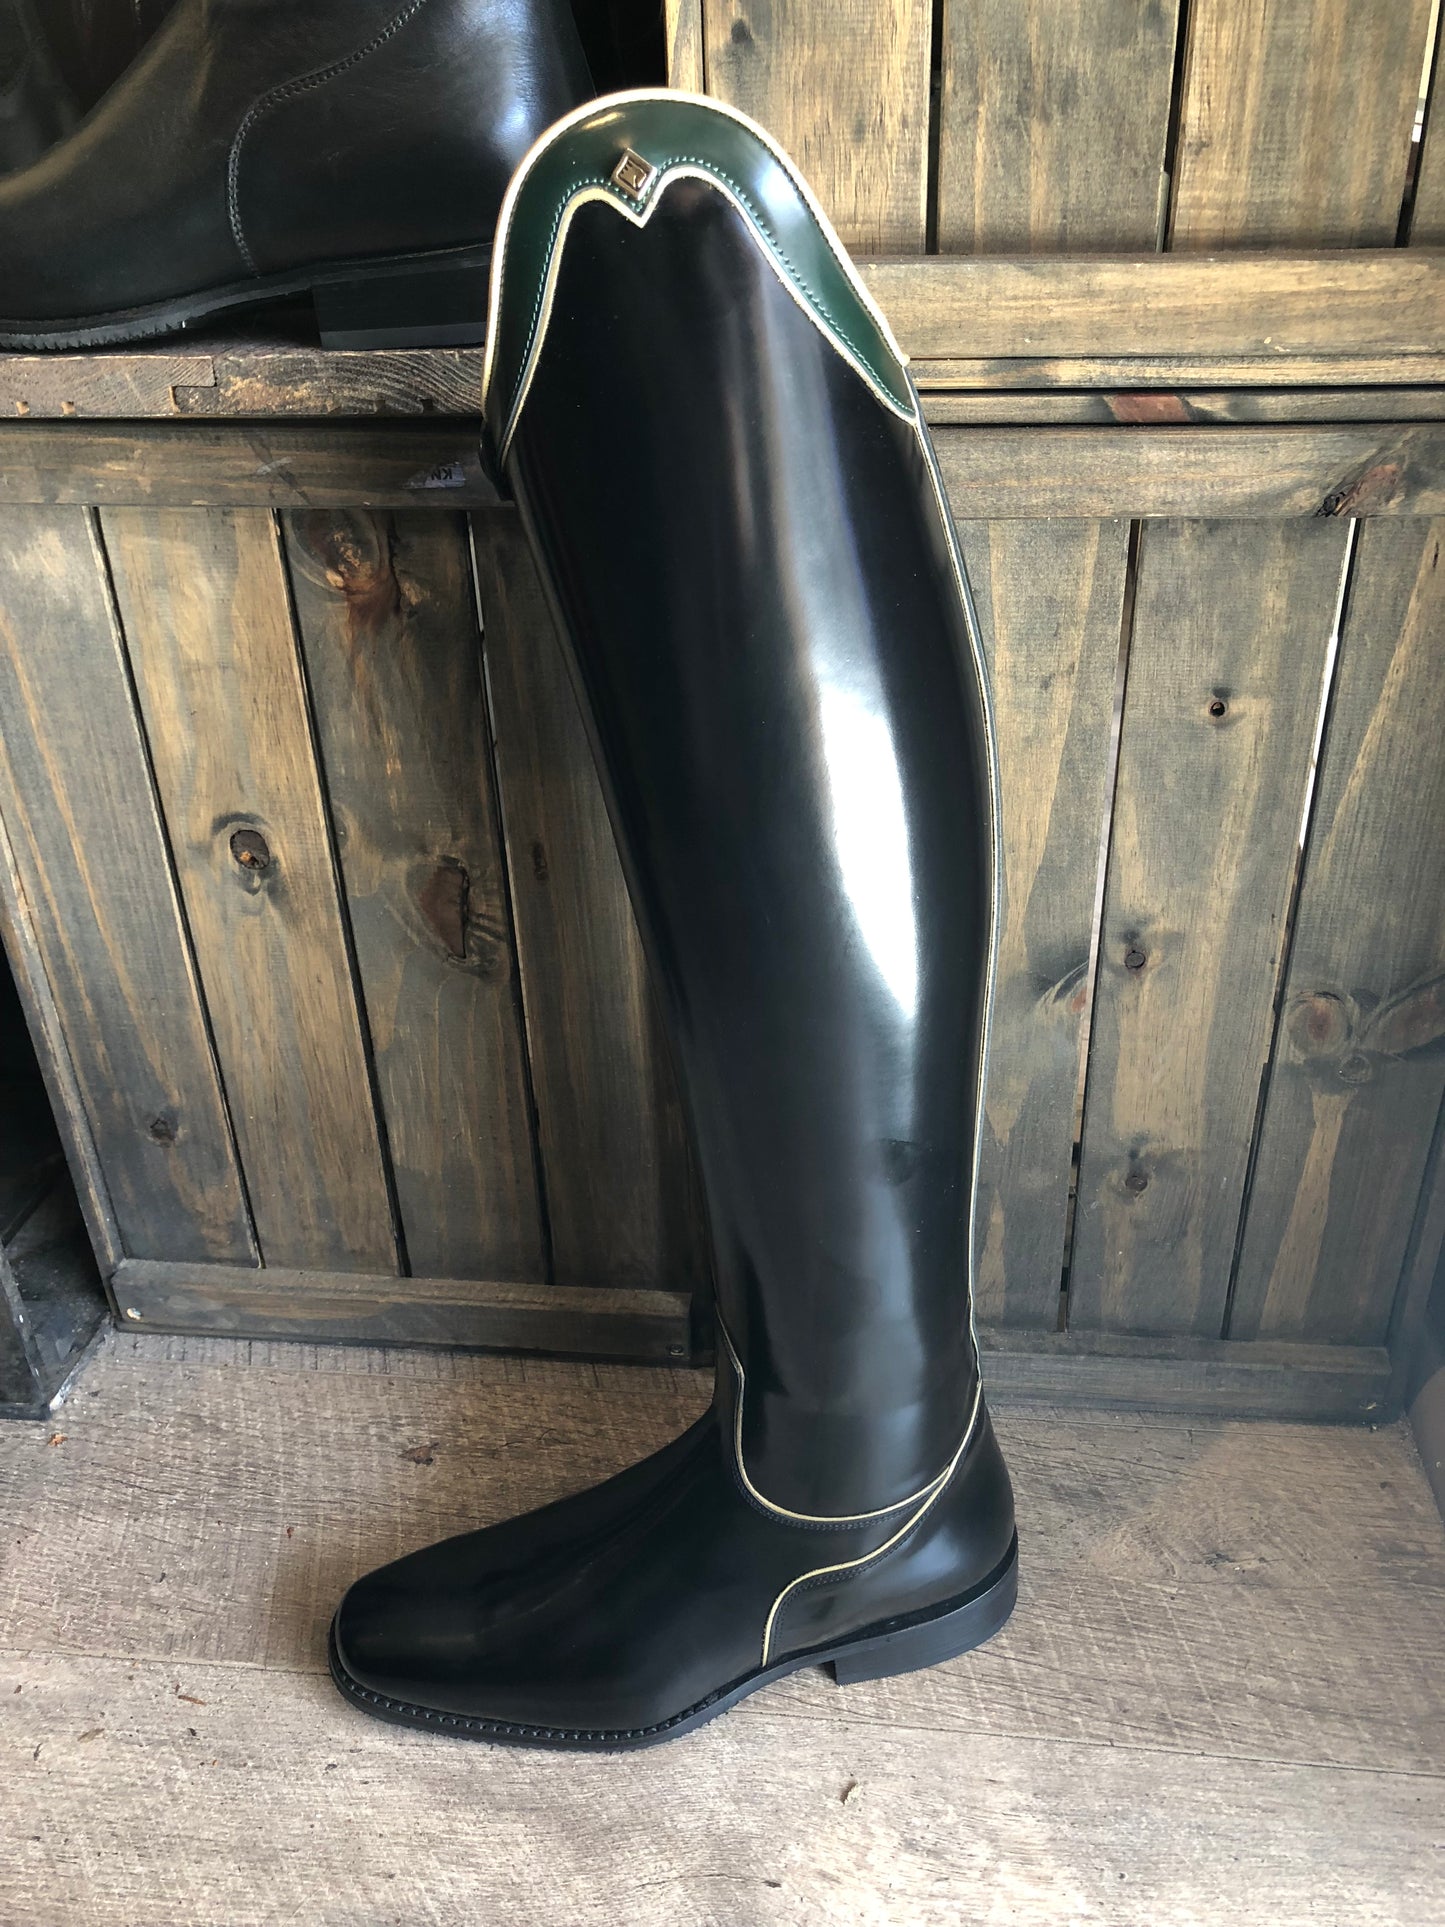 Deniro Dressage Boot With Green And Tan Accents